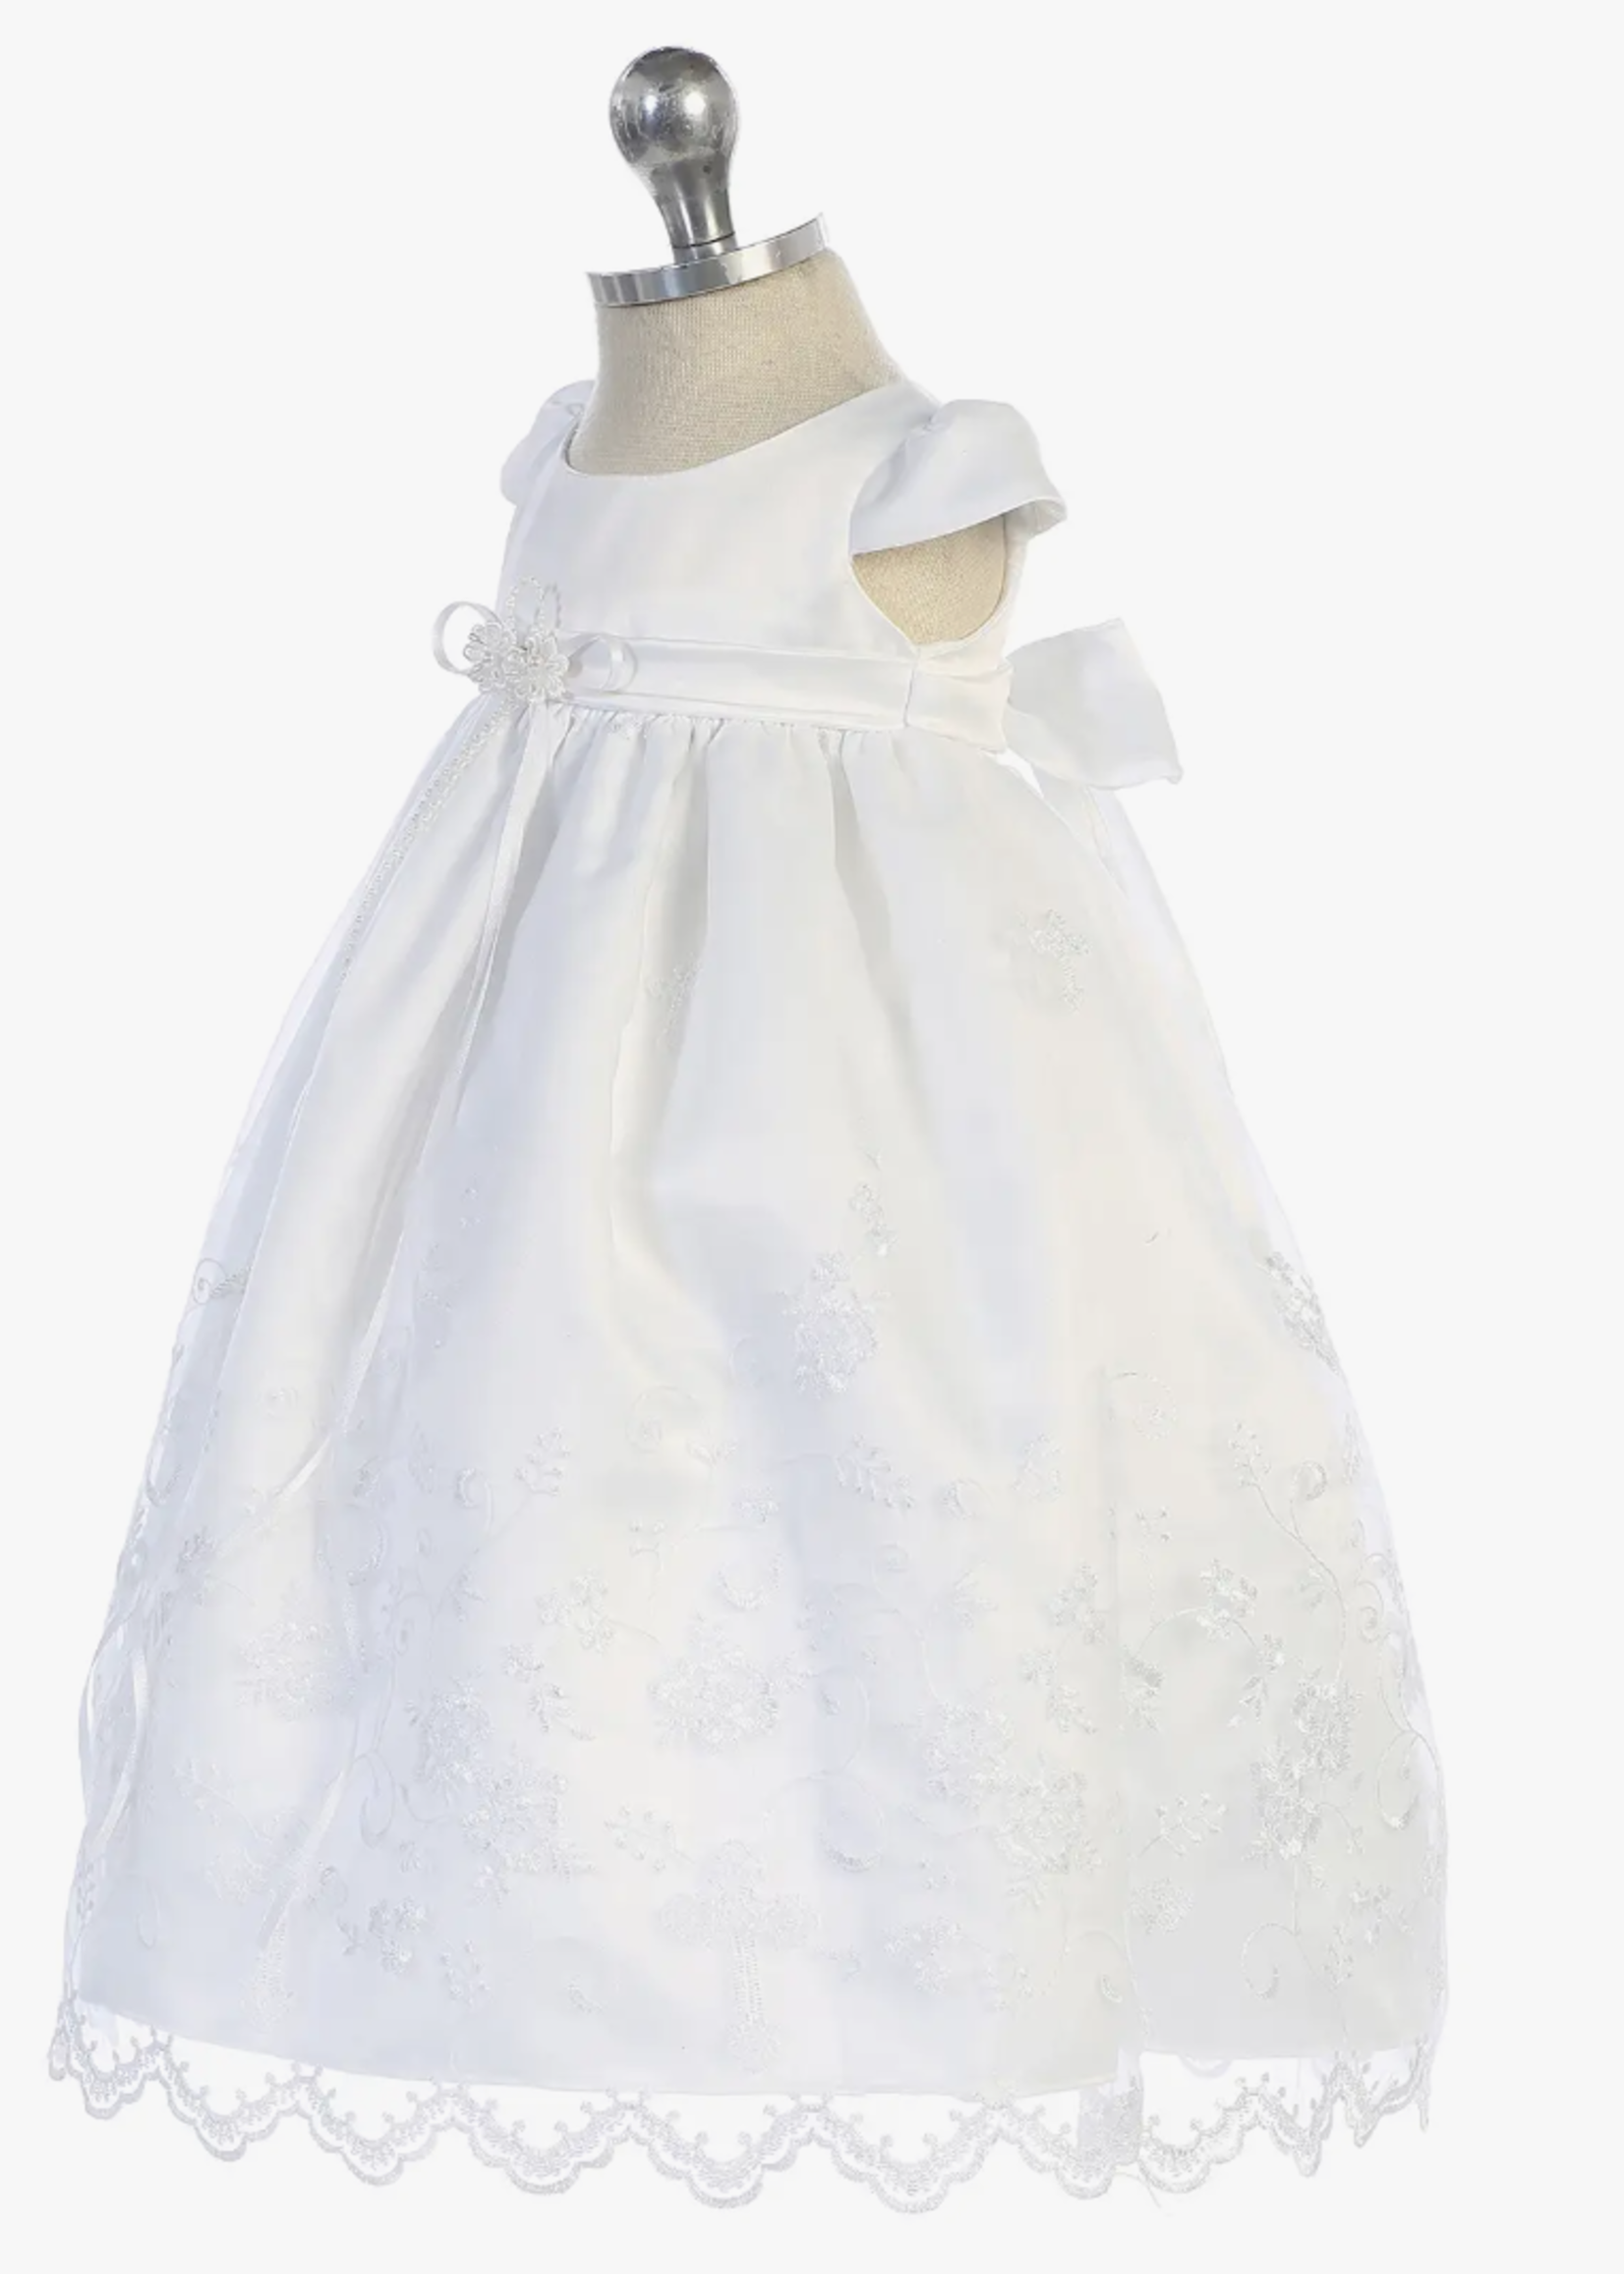 Kid's Dream White Cross Embroidered Christening Gown